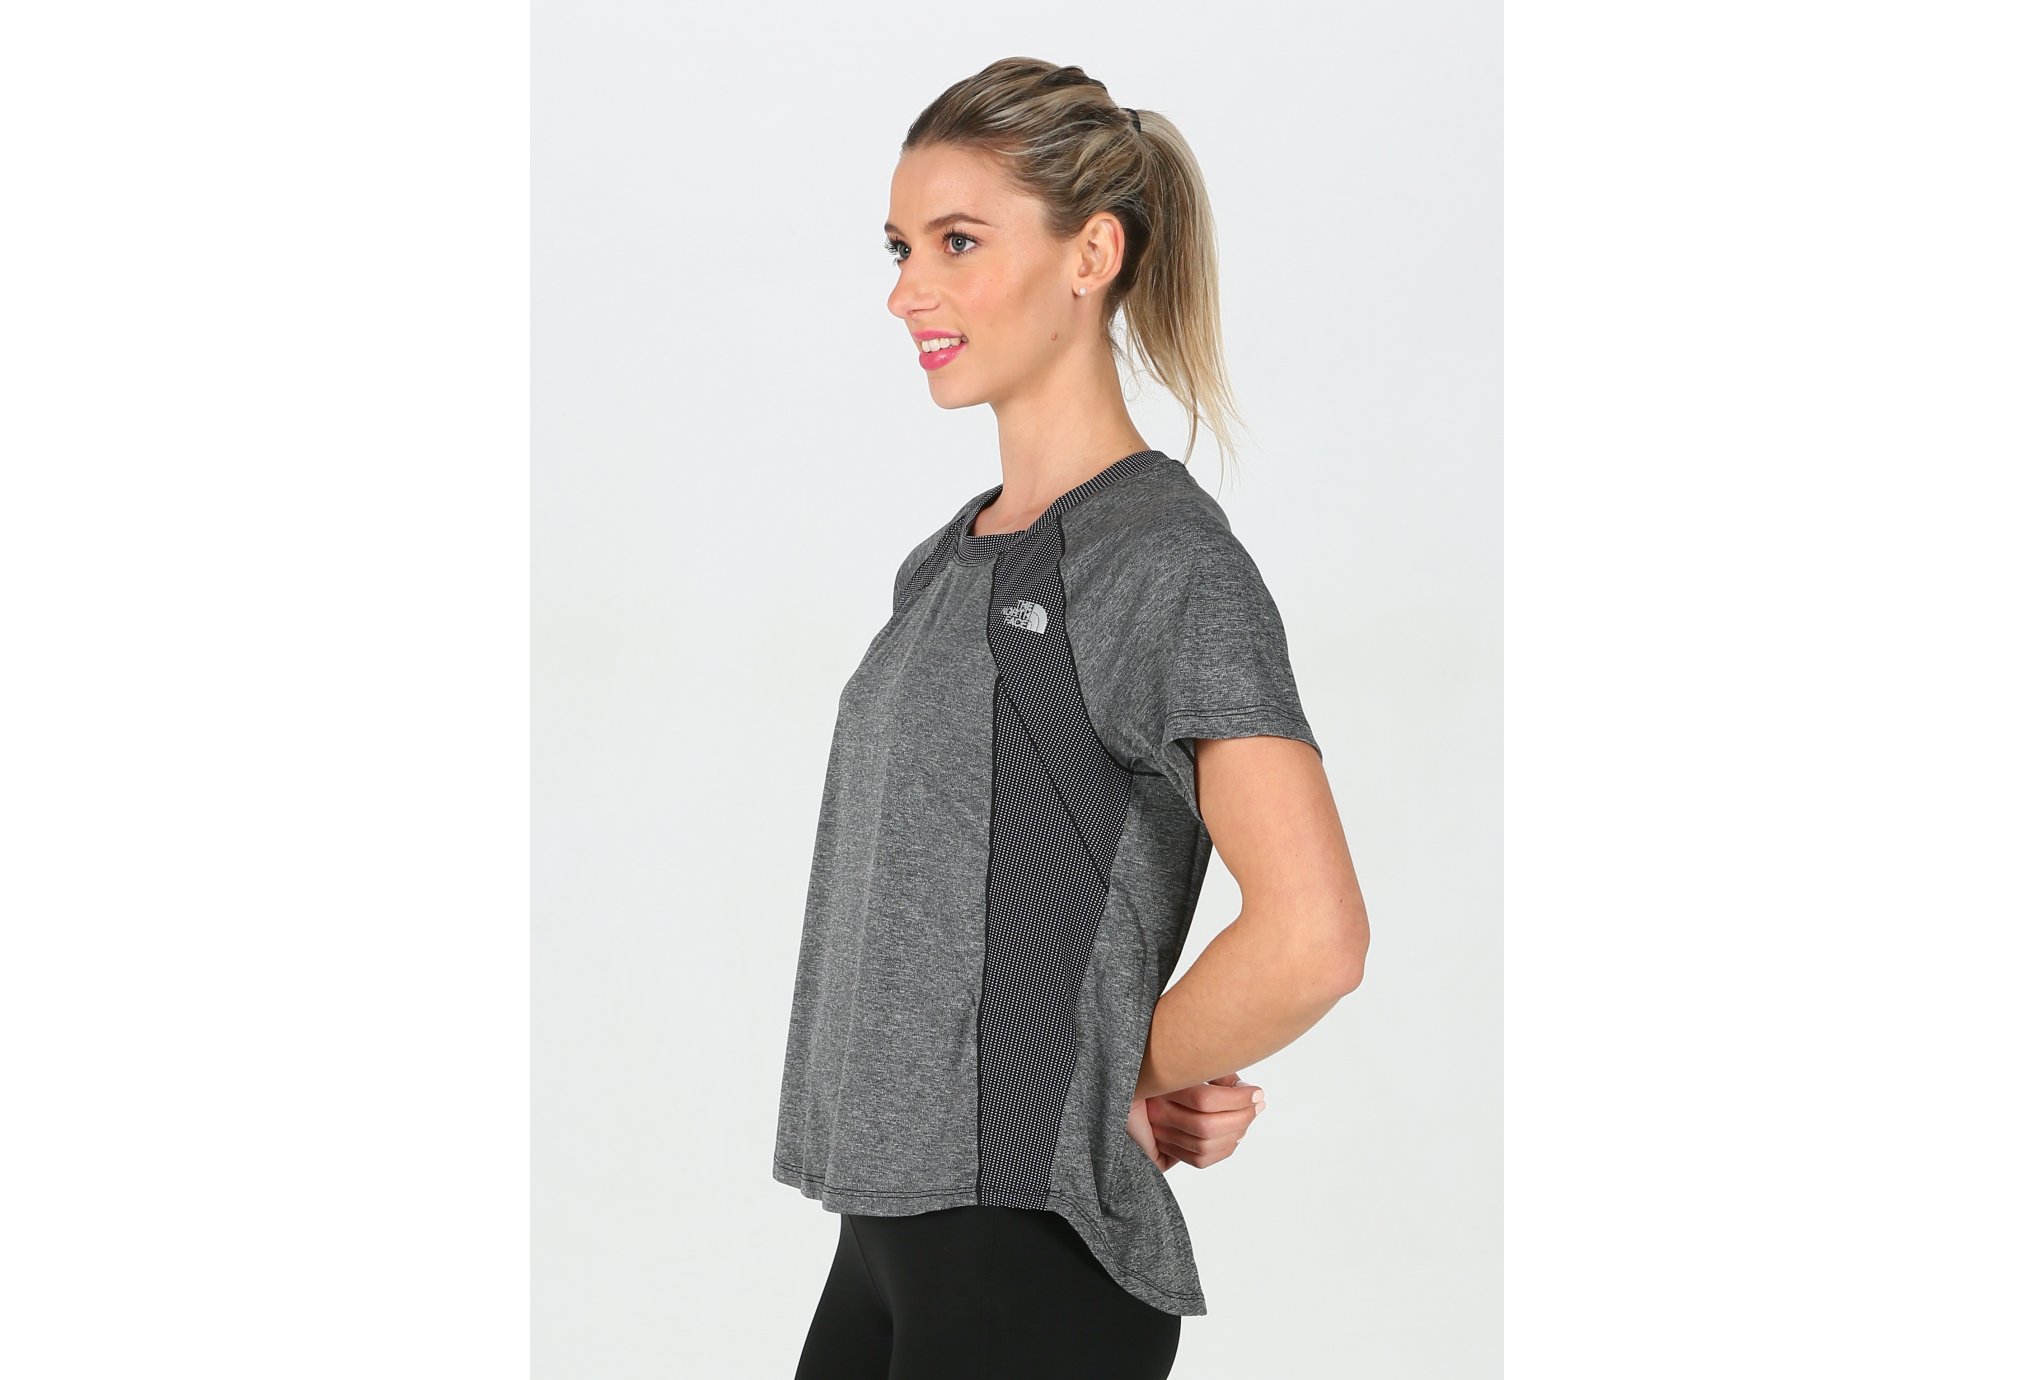 The North face ambition w vêtement running femme